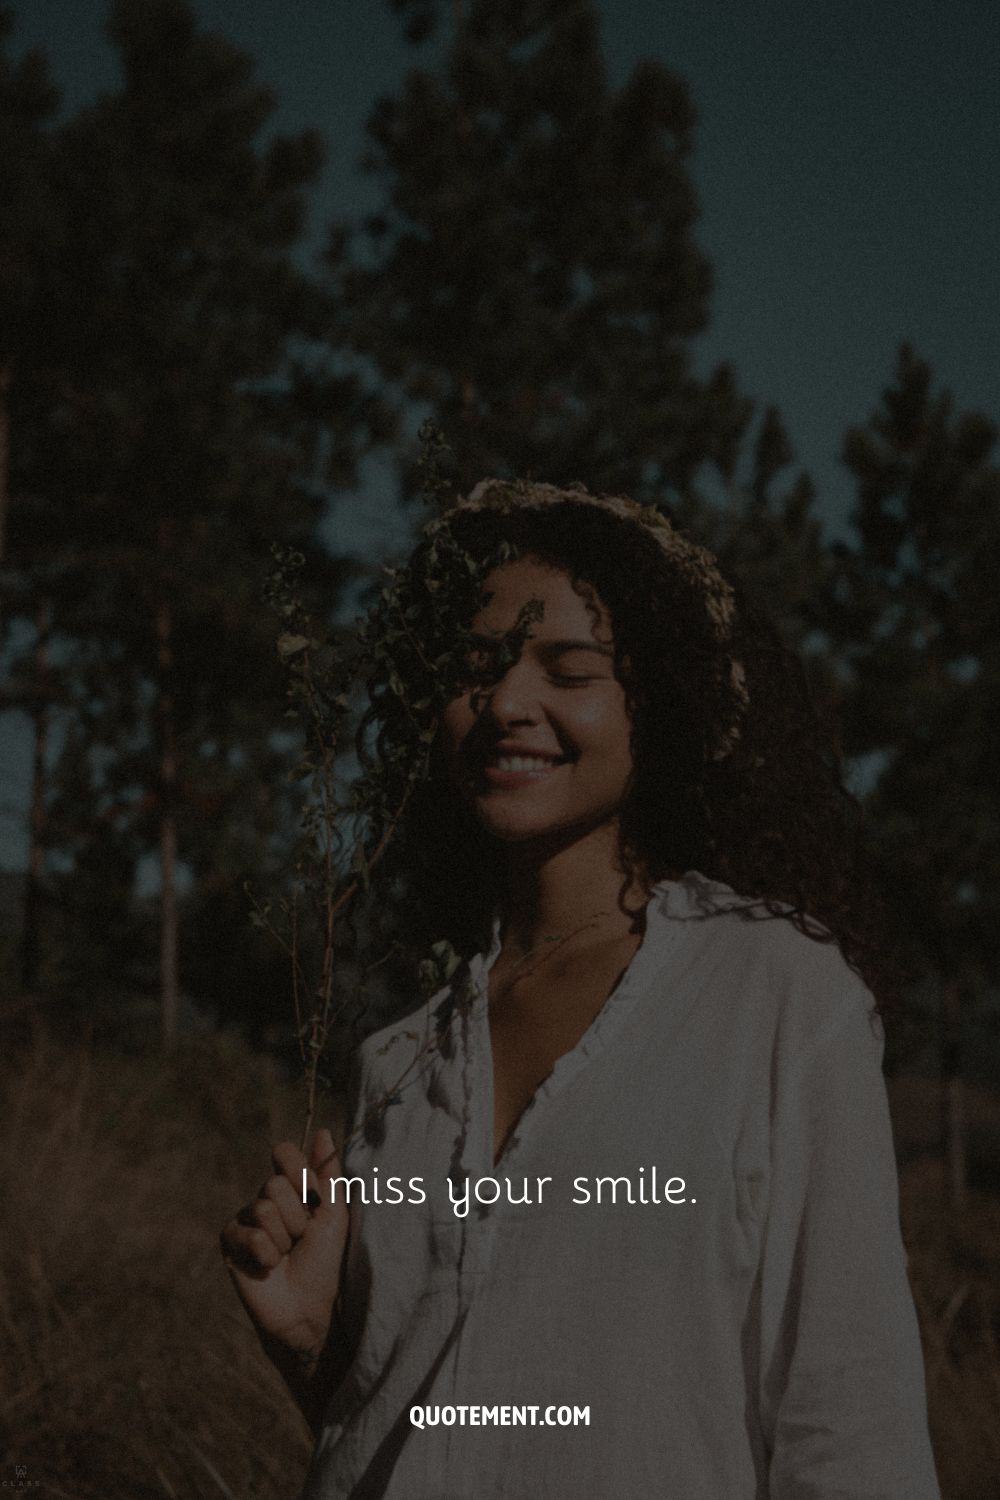 a girl in a white shirt representing cute smiling quote